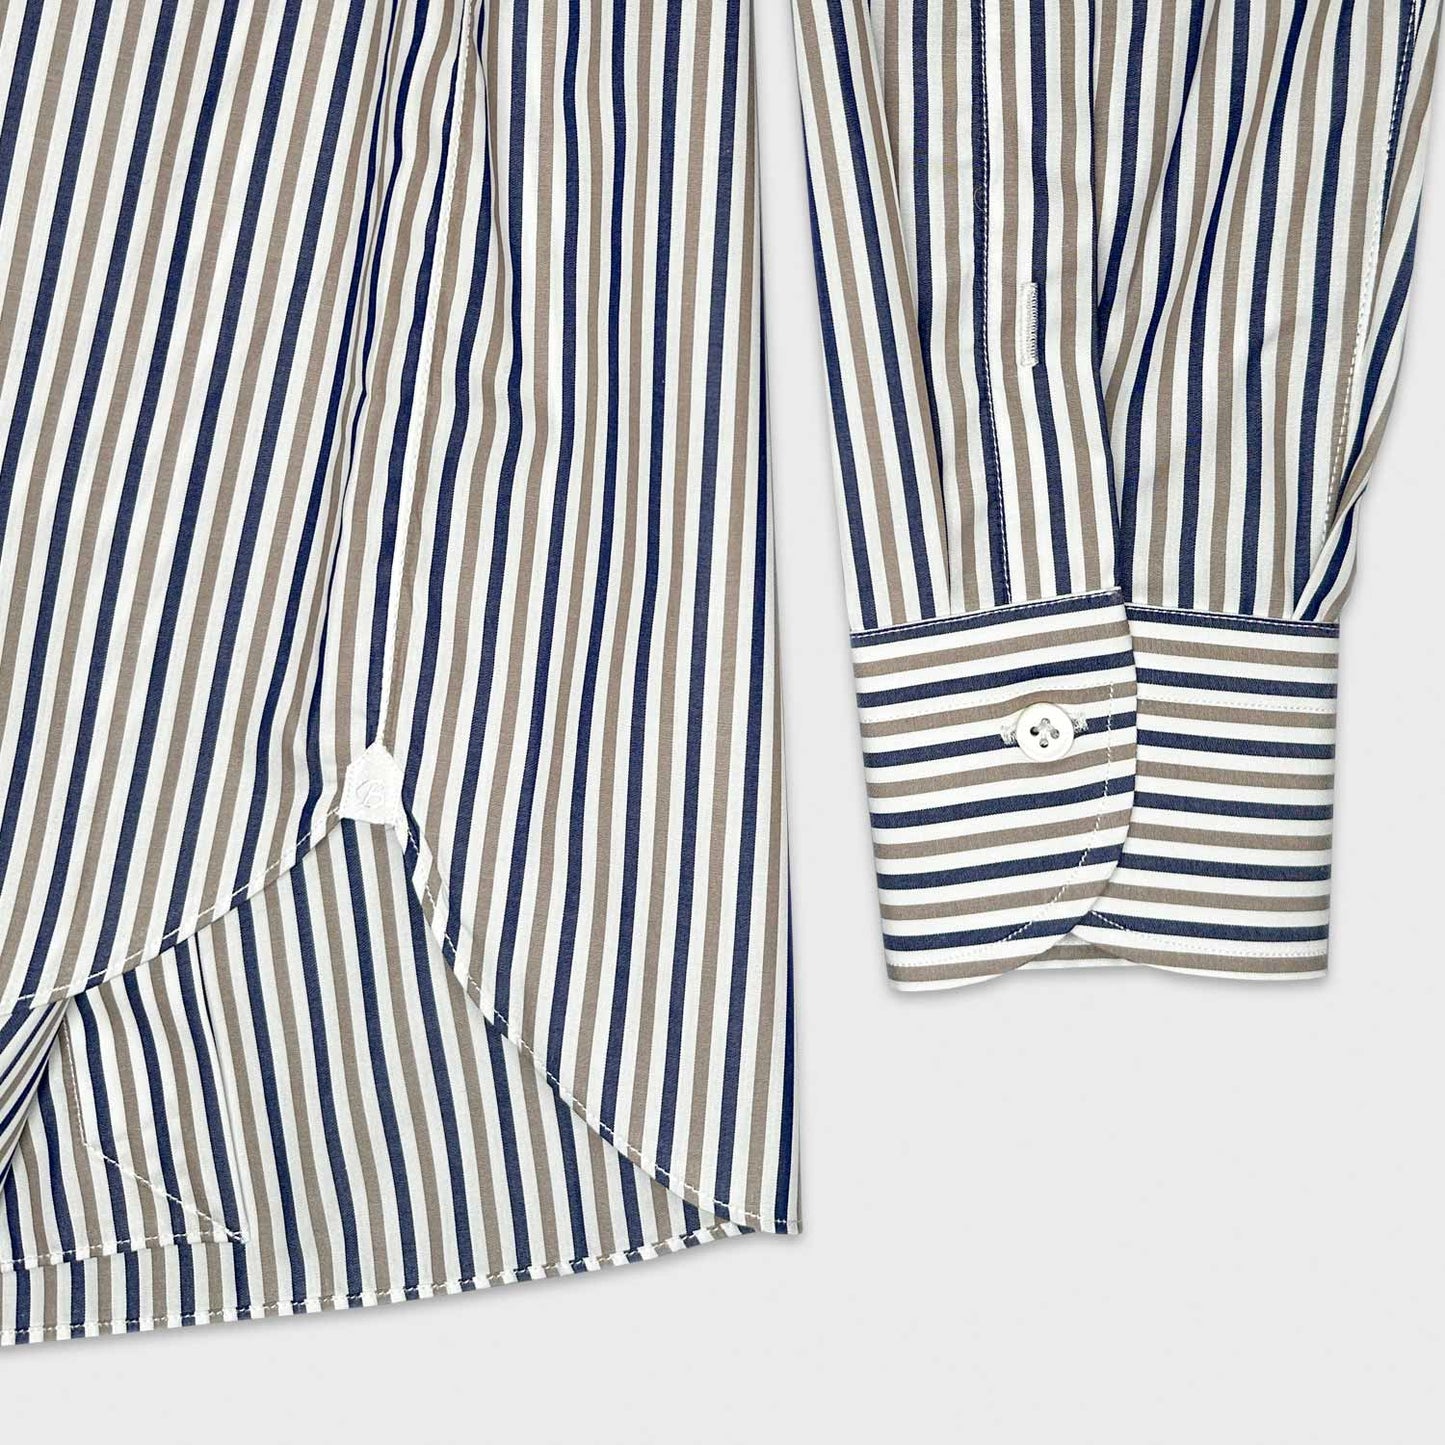 Stonewall brown and navy blue classic striped shirt, handmade by Borriello Napoli exclusive for Wools Boutique Uomo with a refined yarn-dyed fabric in 100% popeline cotton, easy to match with many classic ties and jackets, ideal both for the office and for more formal occasions.​